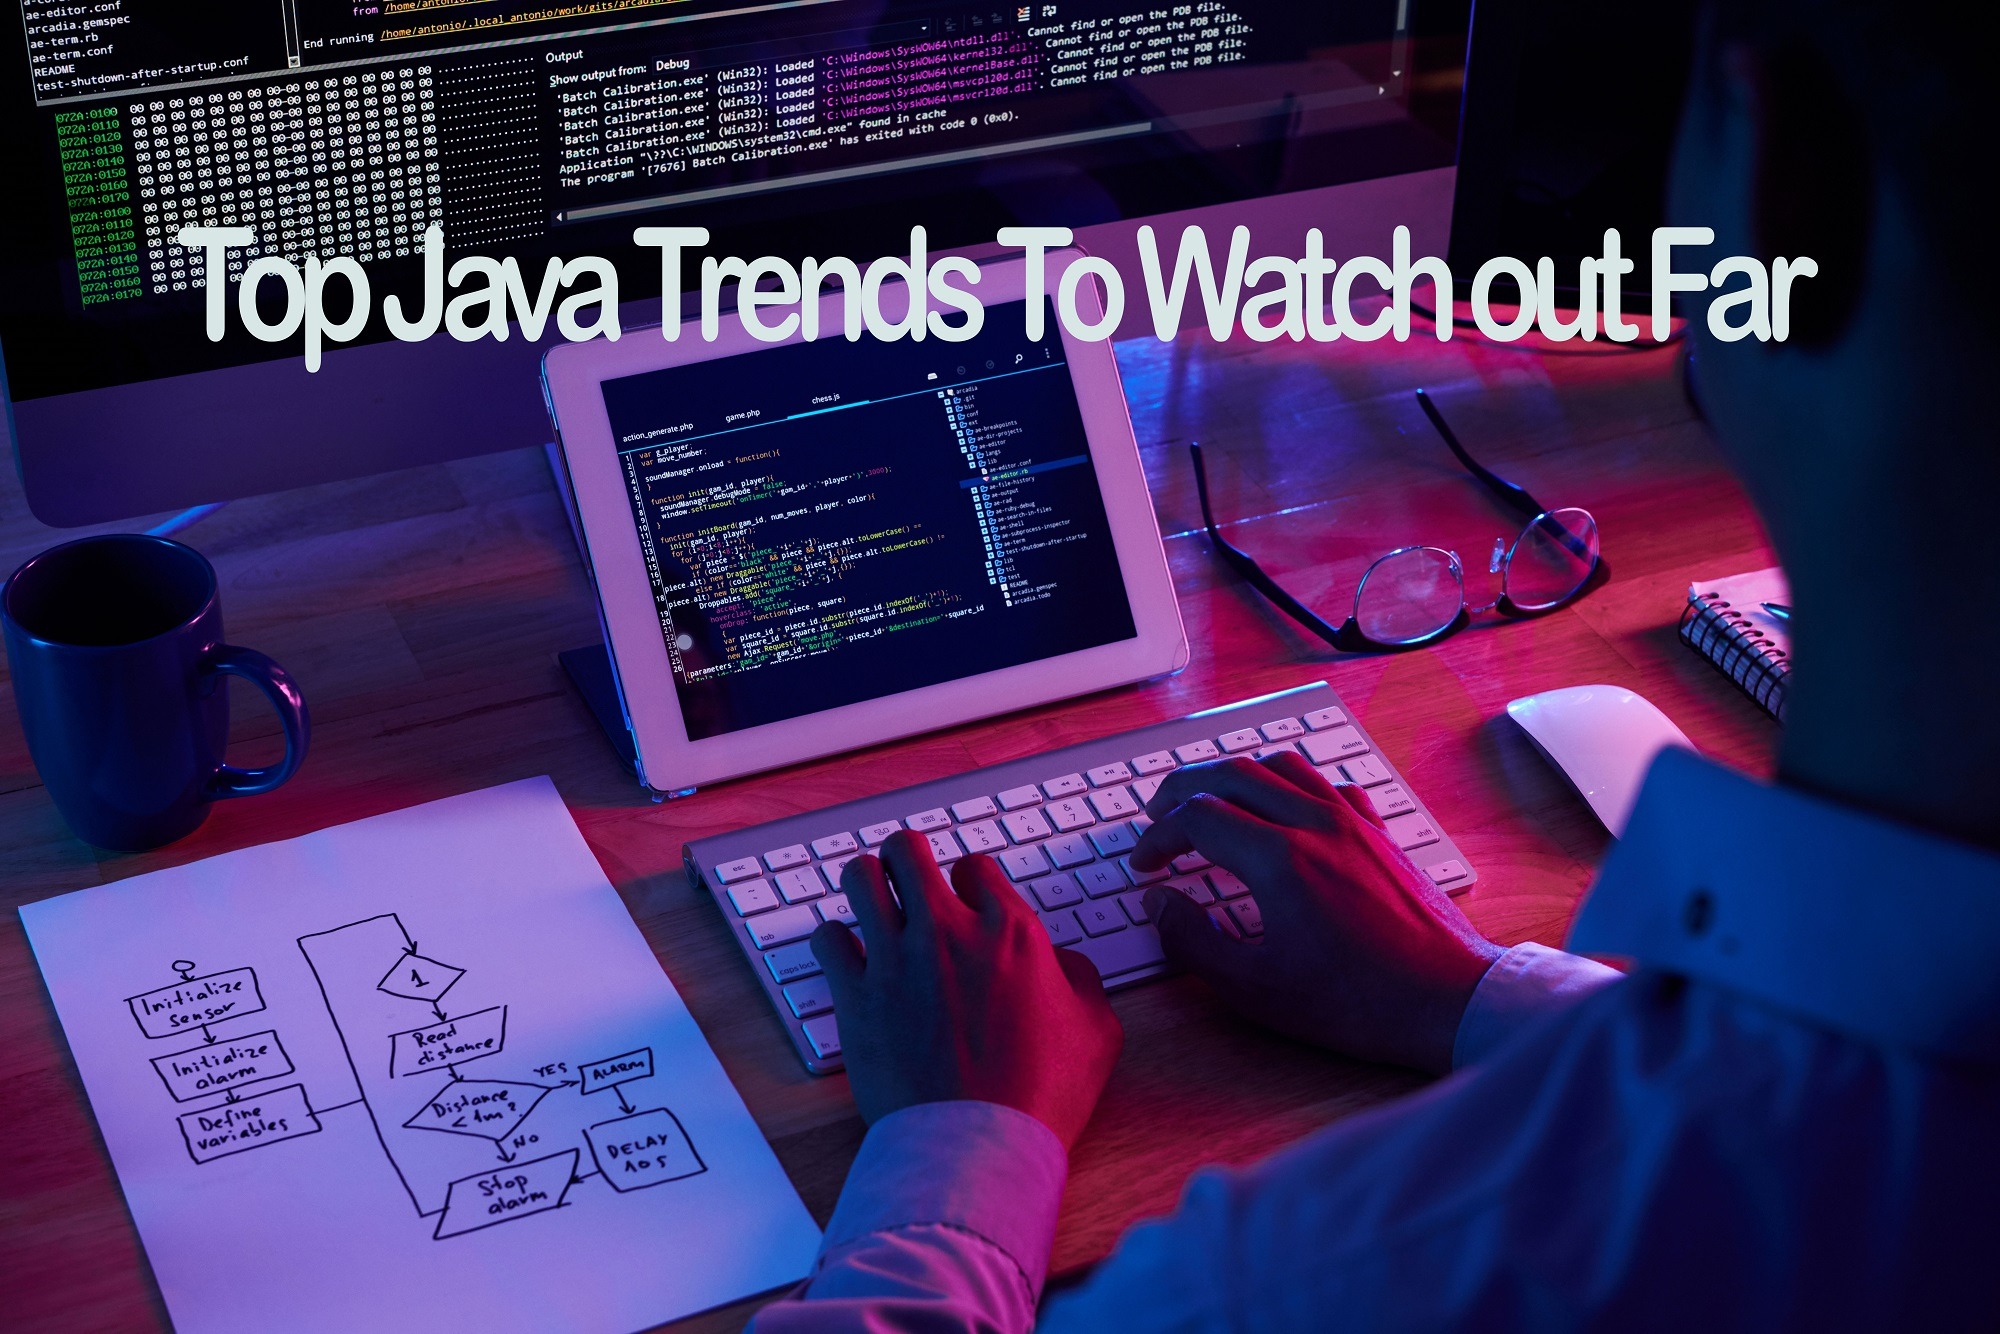 Top Java Trends To Watch out Far